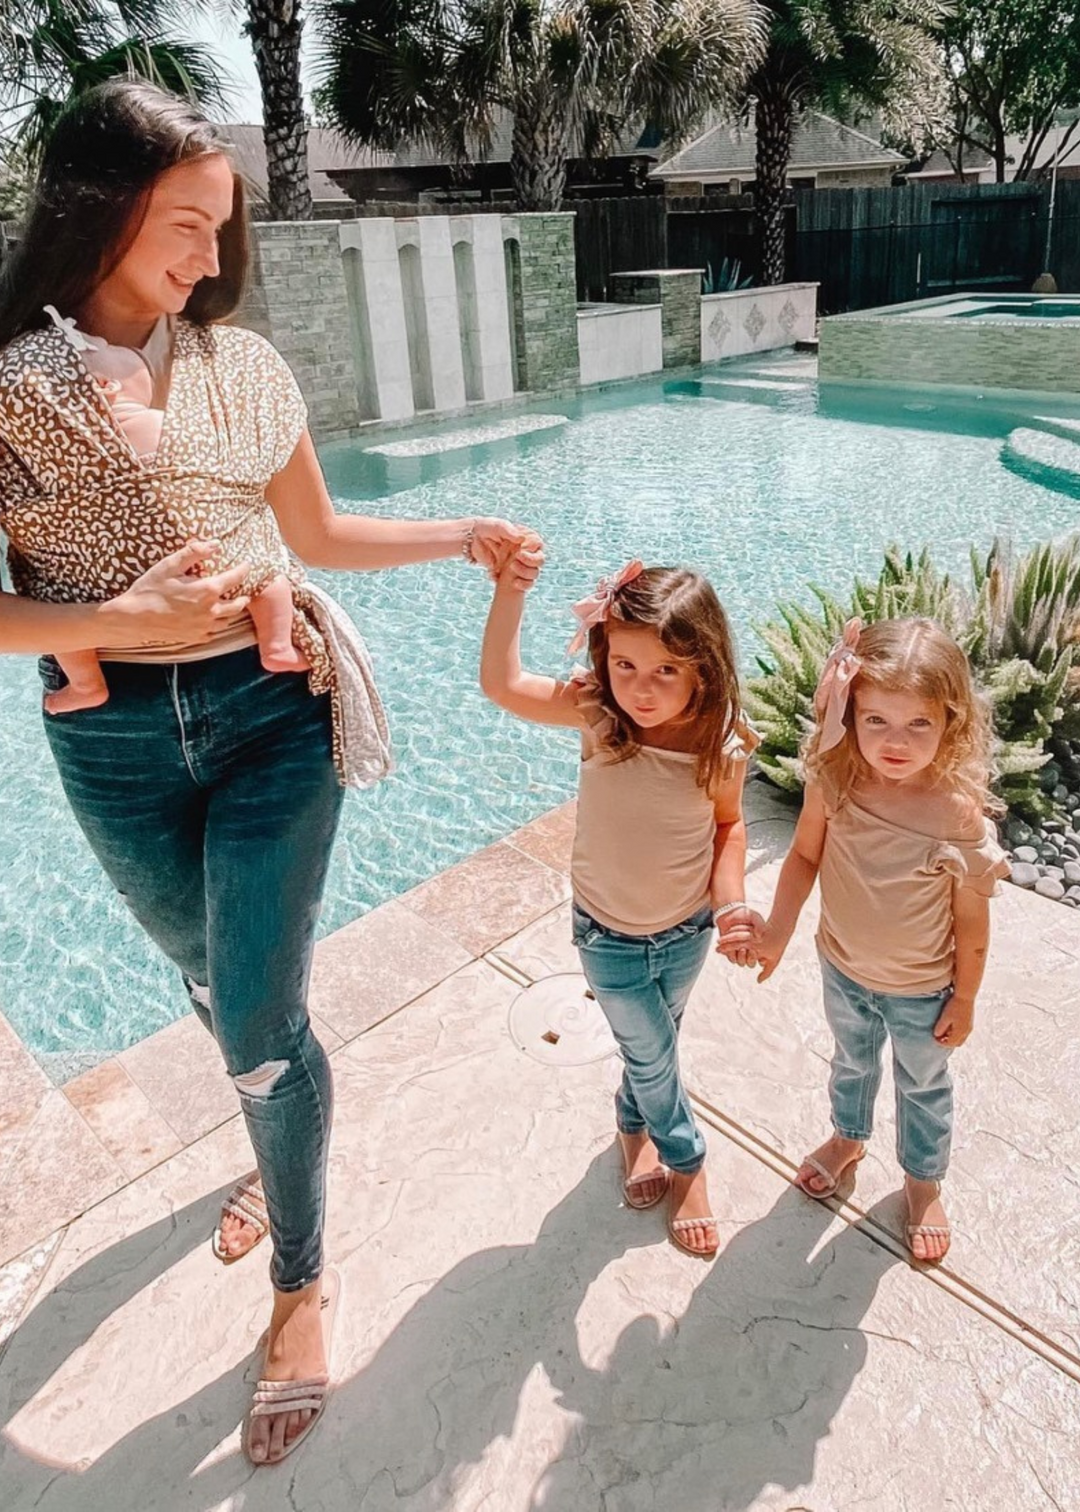 ARIA B THREE STRAP STUDDED SLIP ONS IN SOLID NUDE . Jelly sandals perfect for summer, sandals that you can wear all day long and match with aria kids collection of mommy and me